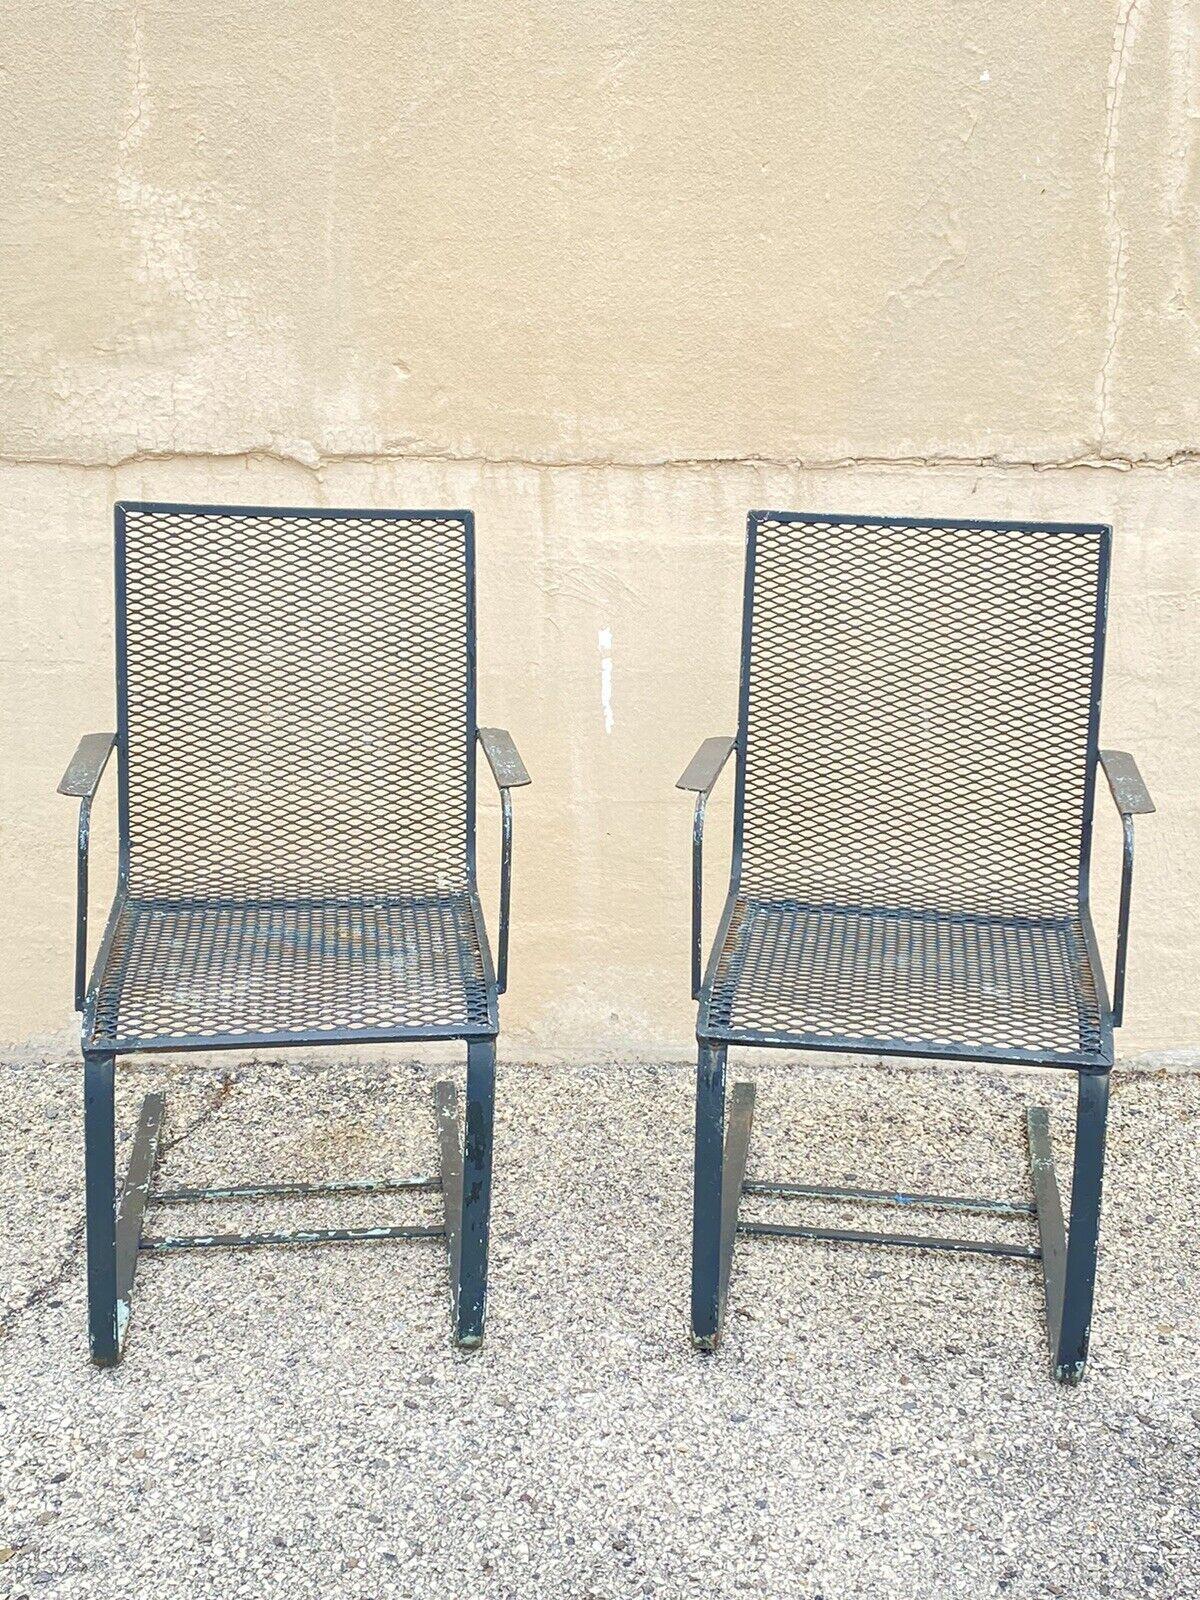 Vintage Industrial Modern Green Heavy Wrought Iron Metal Mesh Cantilever Garden Patio Chairs - a Pair. Circa Mid 20th Century
Dimensions : 35,5